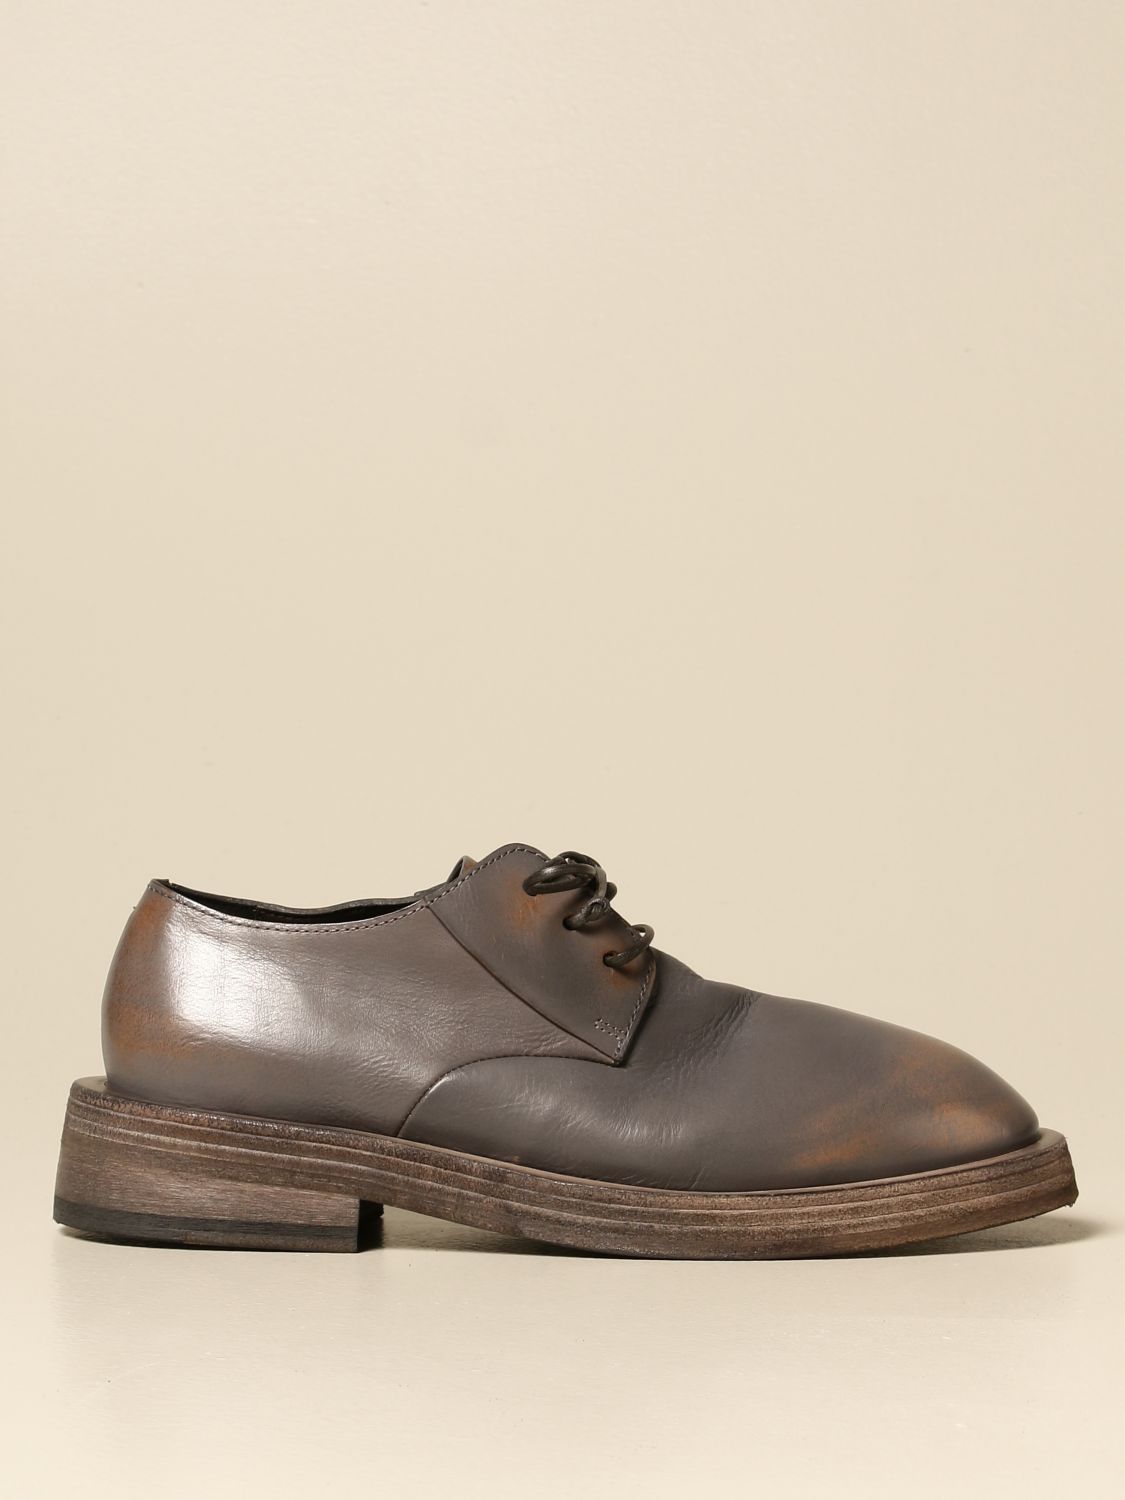 Marsell Outlet: Marsèll Mentone Derby in waxed leather | Brogue Shoes ...